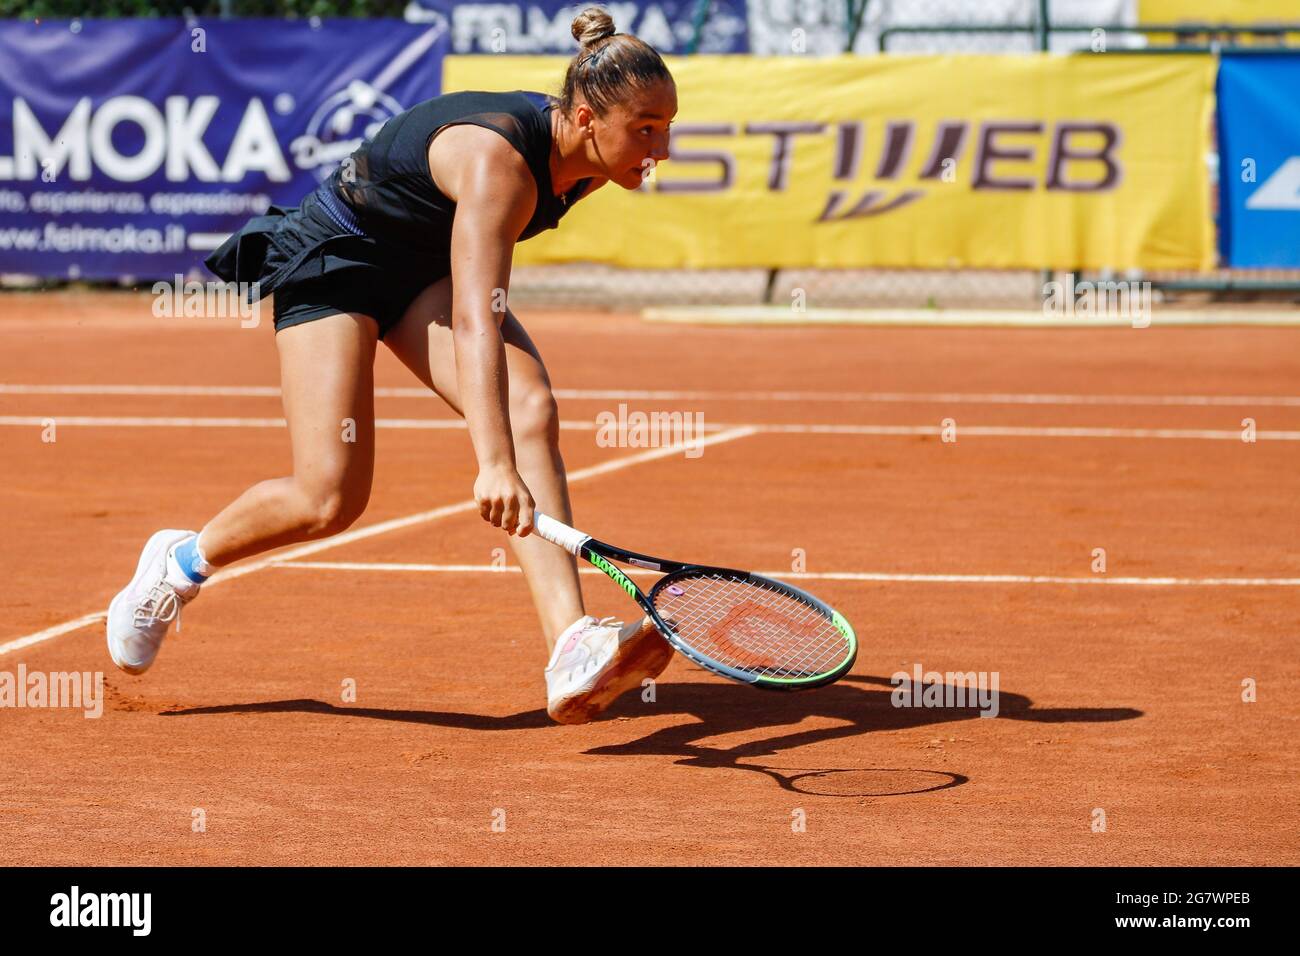 Milan, Italy. 16th July, 2021. Sofia Costoulas from Belgium during  Bonfiglio Trophy 2021, Tennis Internationals in Milan, Italy, July 16 2021  Credit: Independent Photo Agency/Alamy Live News Stock Photo - Alamy